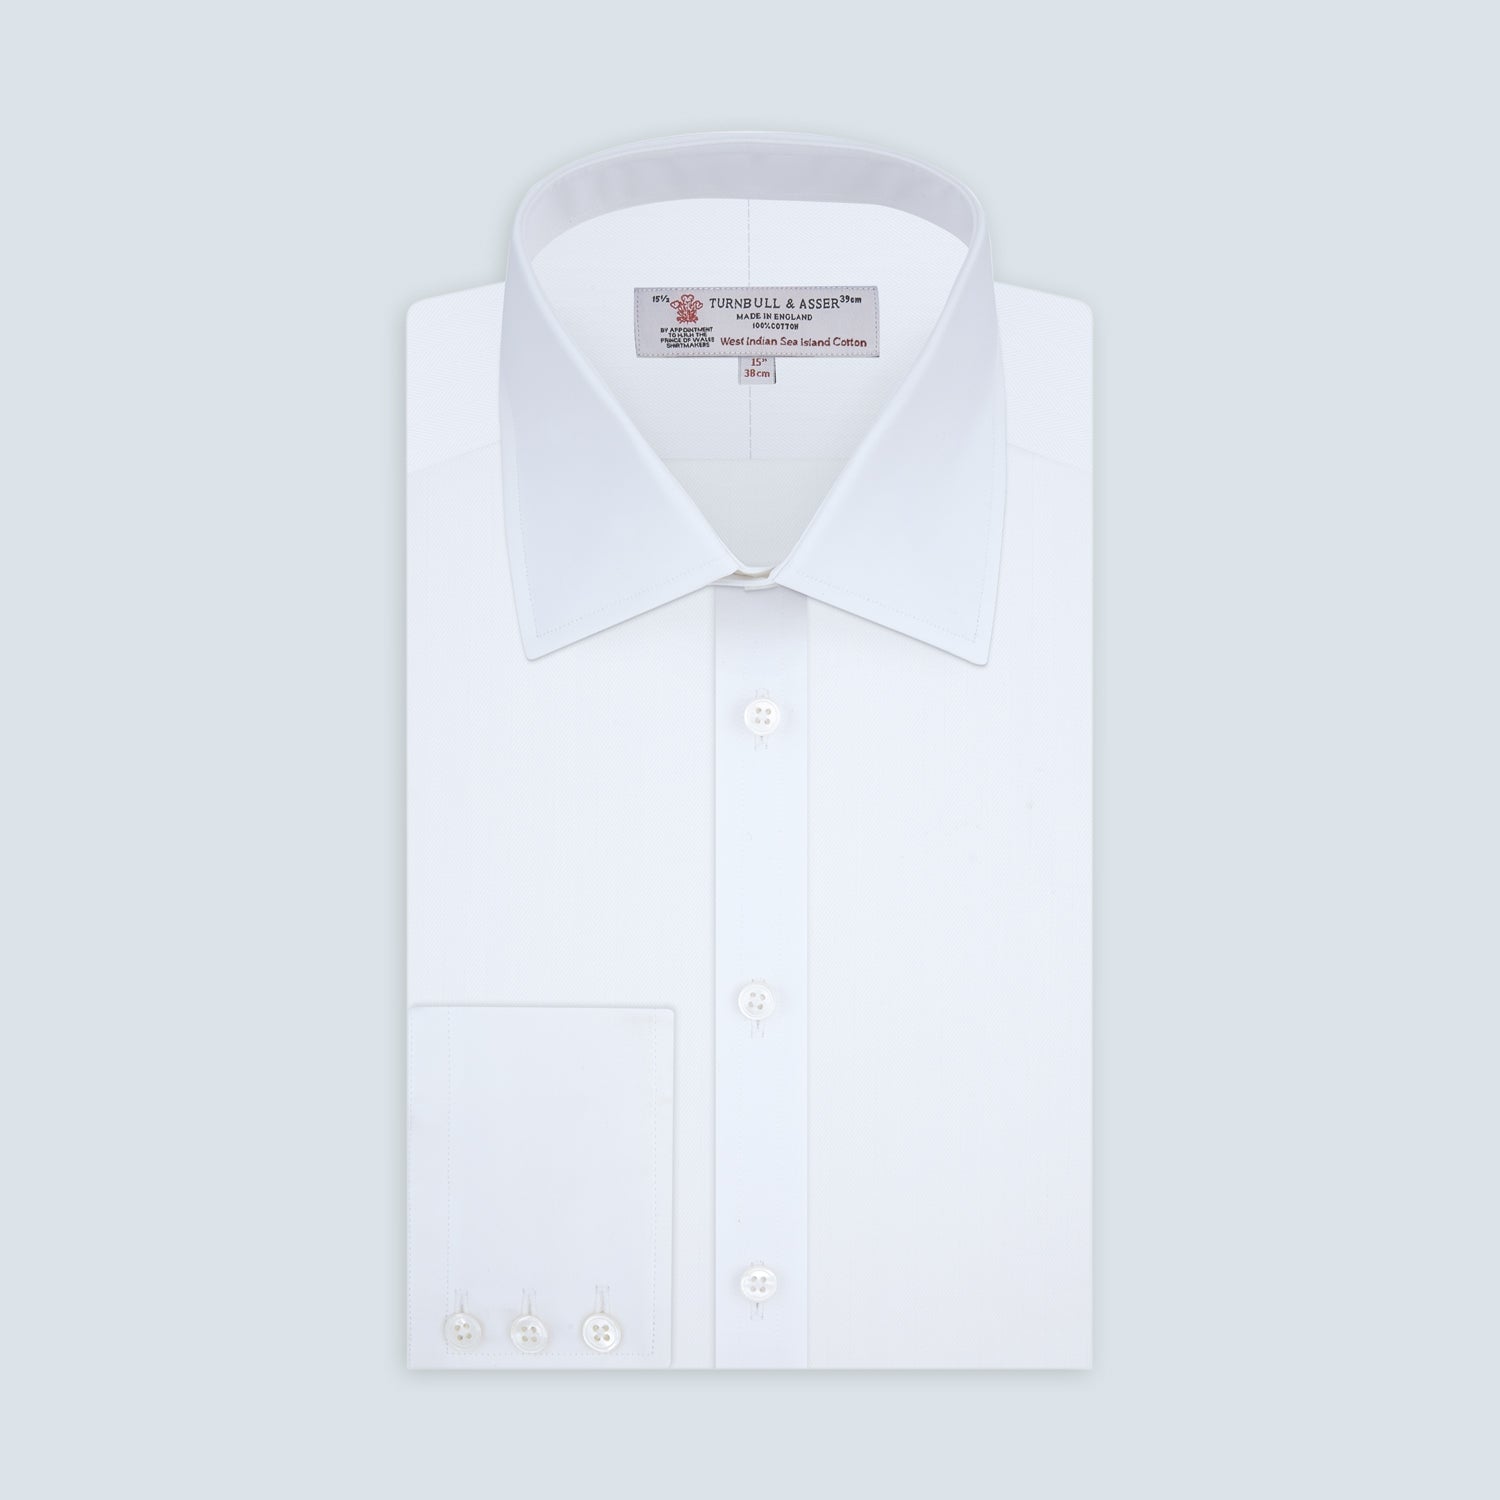 White Self-On-Self Herringbone Sea Island Quality Cotton Shirt with Regent Collar and 3-Button Cuffs